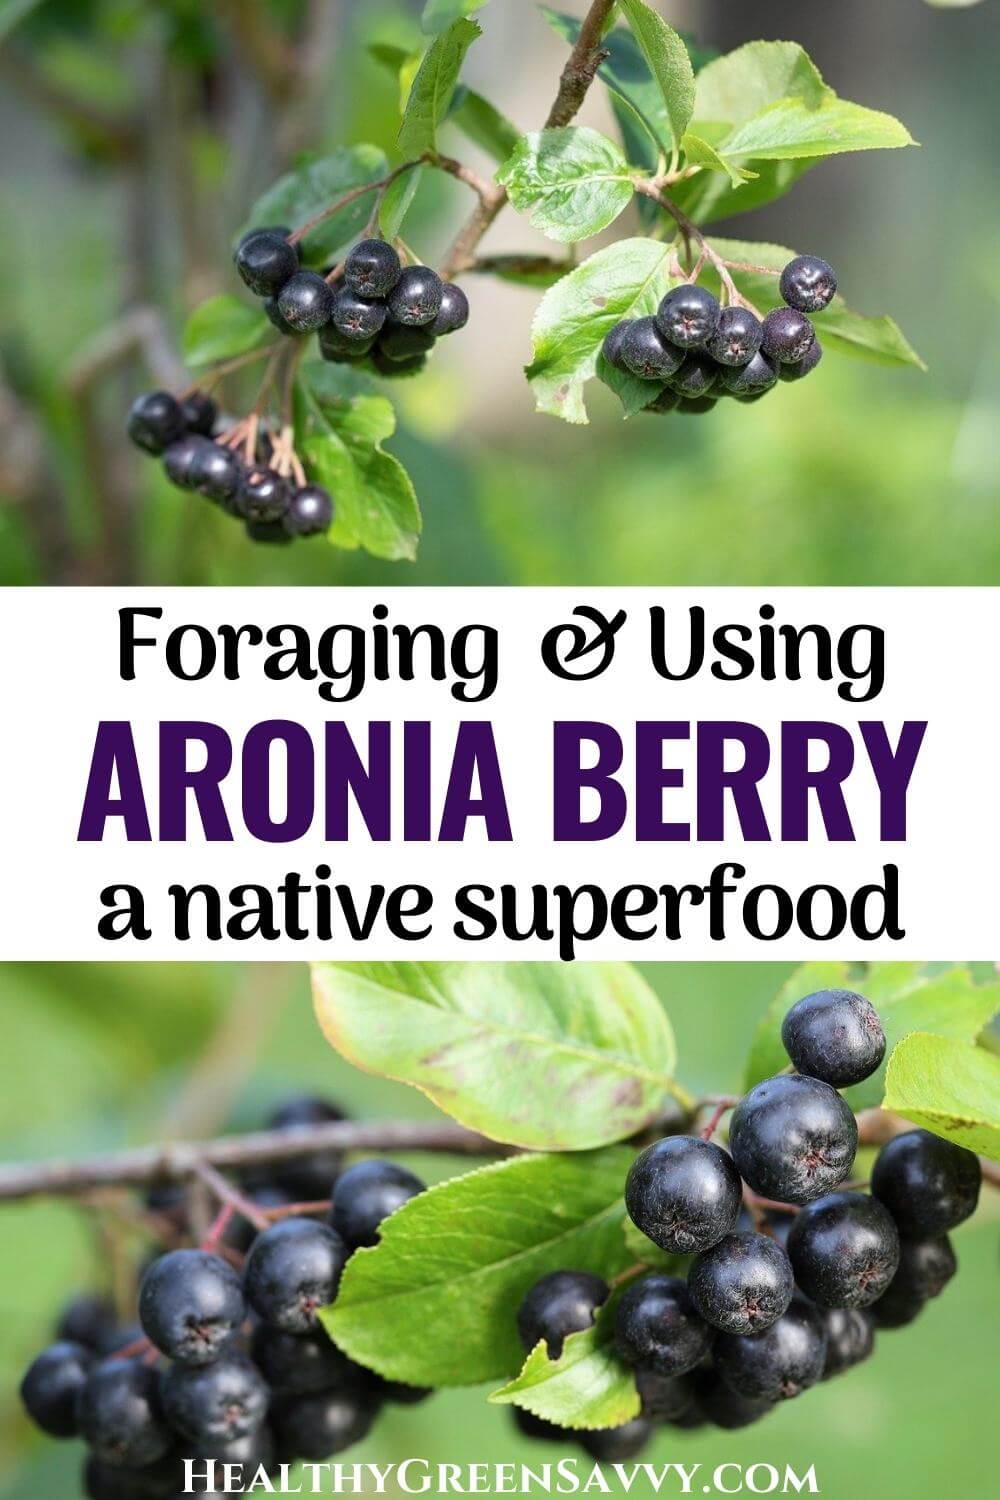 the beautiful black aroniabeere! Delicious and very healthy